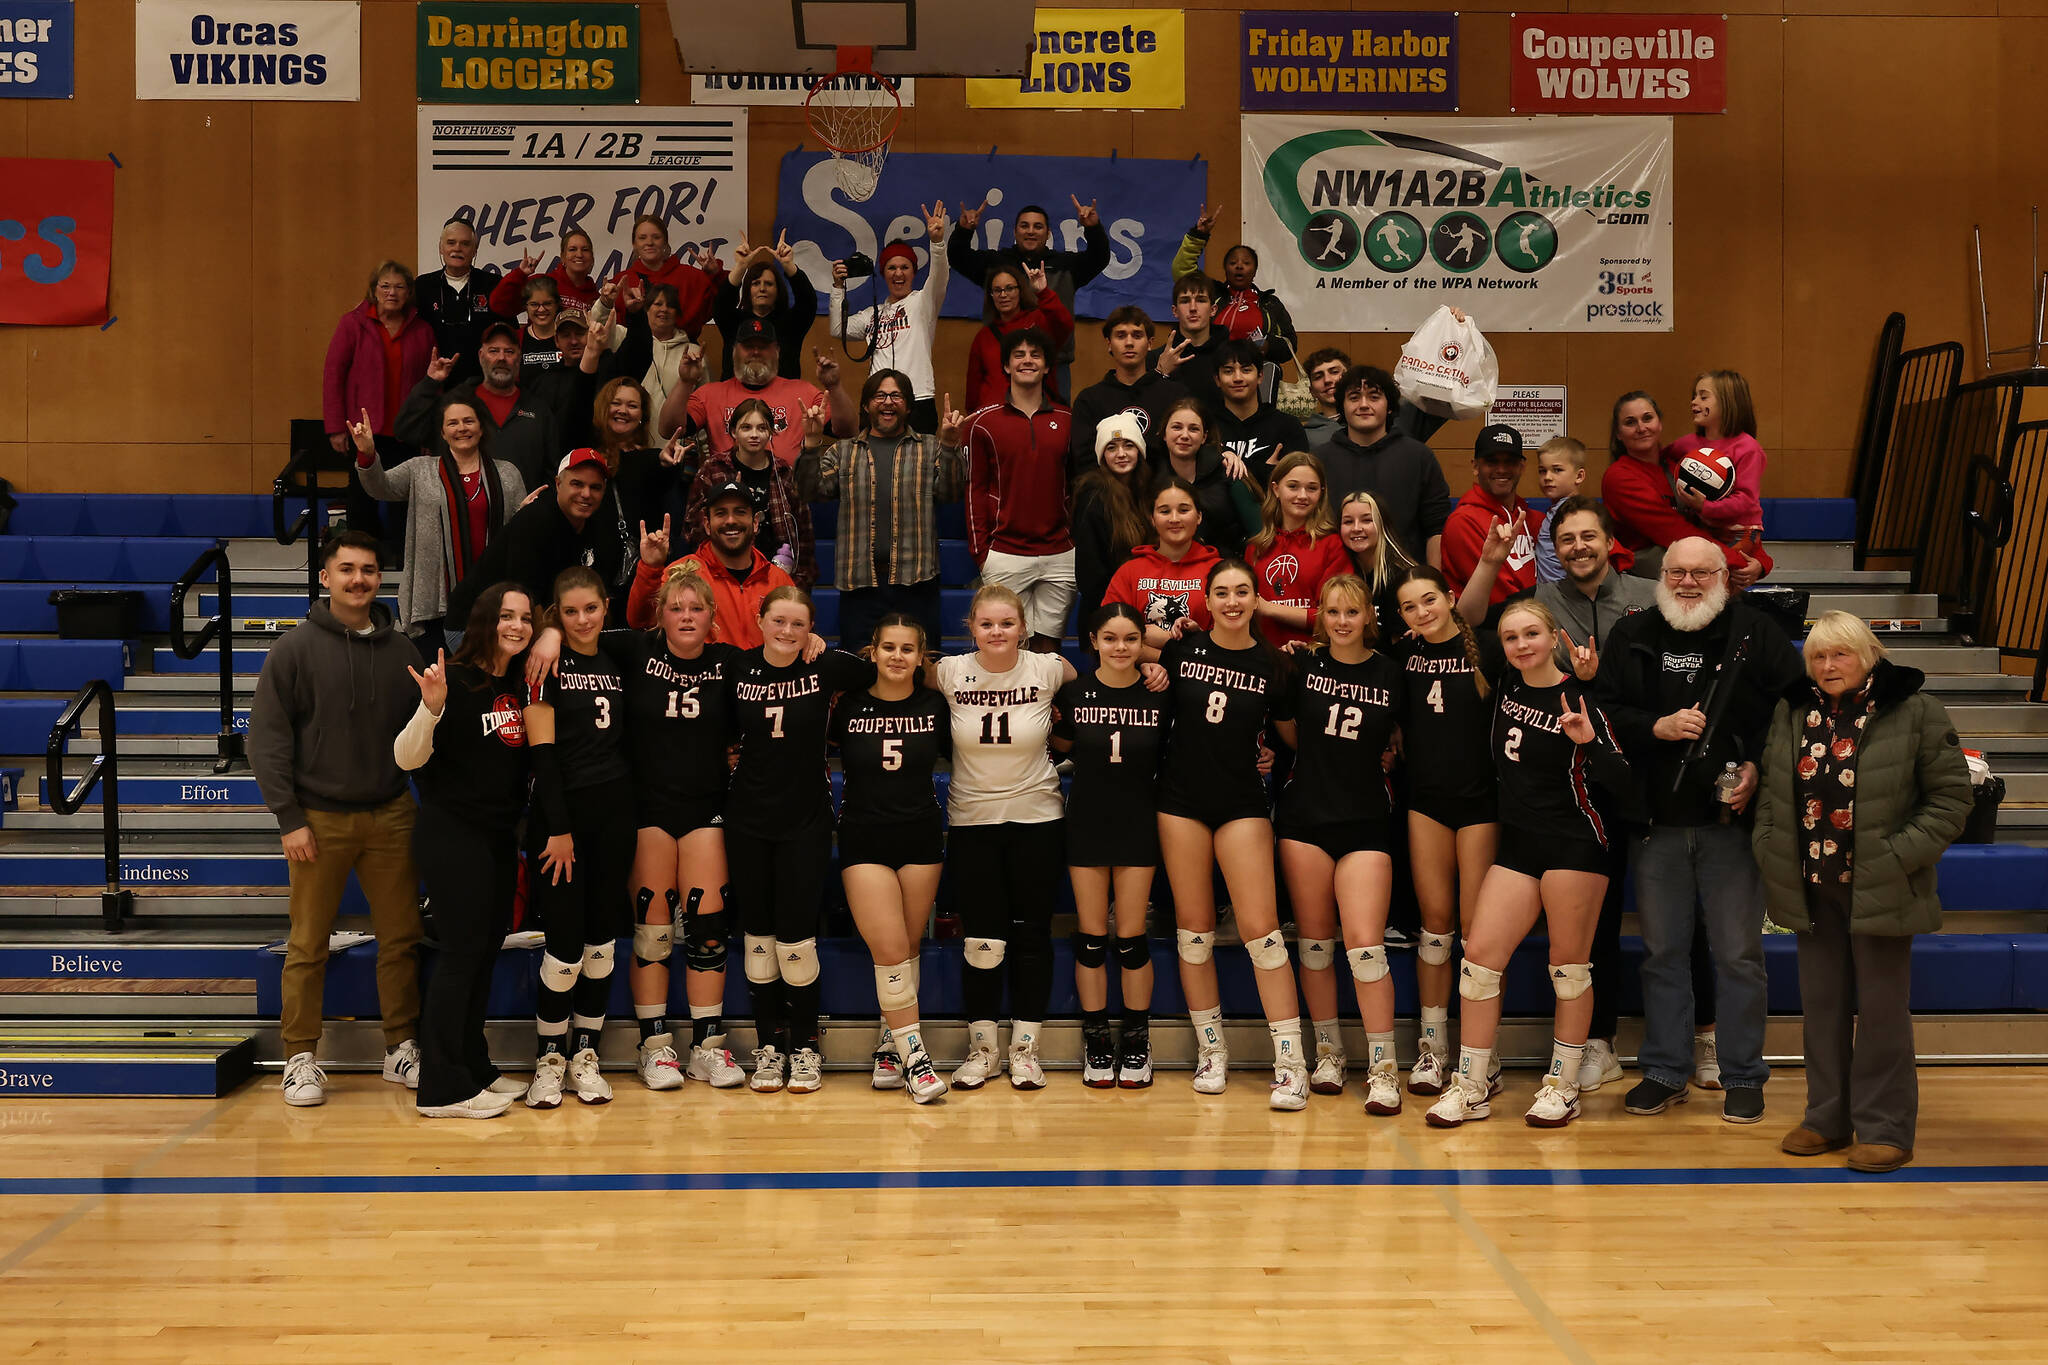 Photo by John Fisken
The Wolf volleyball team poses with their fans after earning their first trip to the state tournament since 2017.